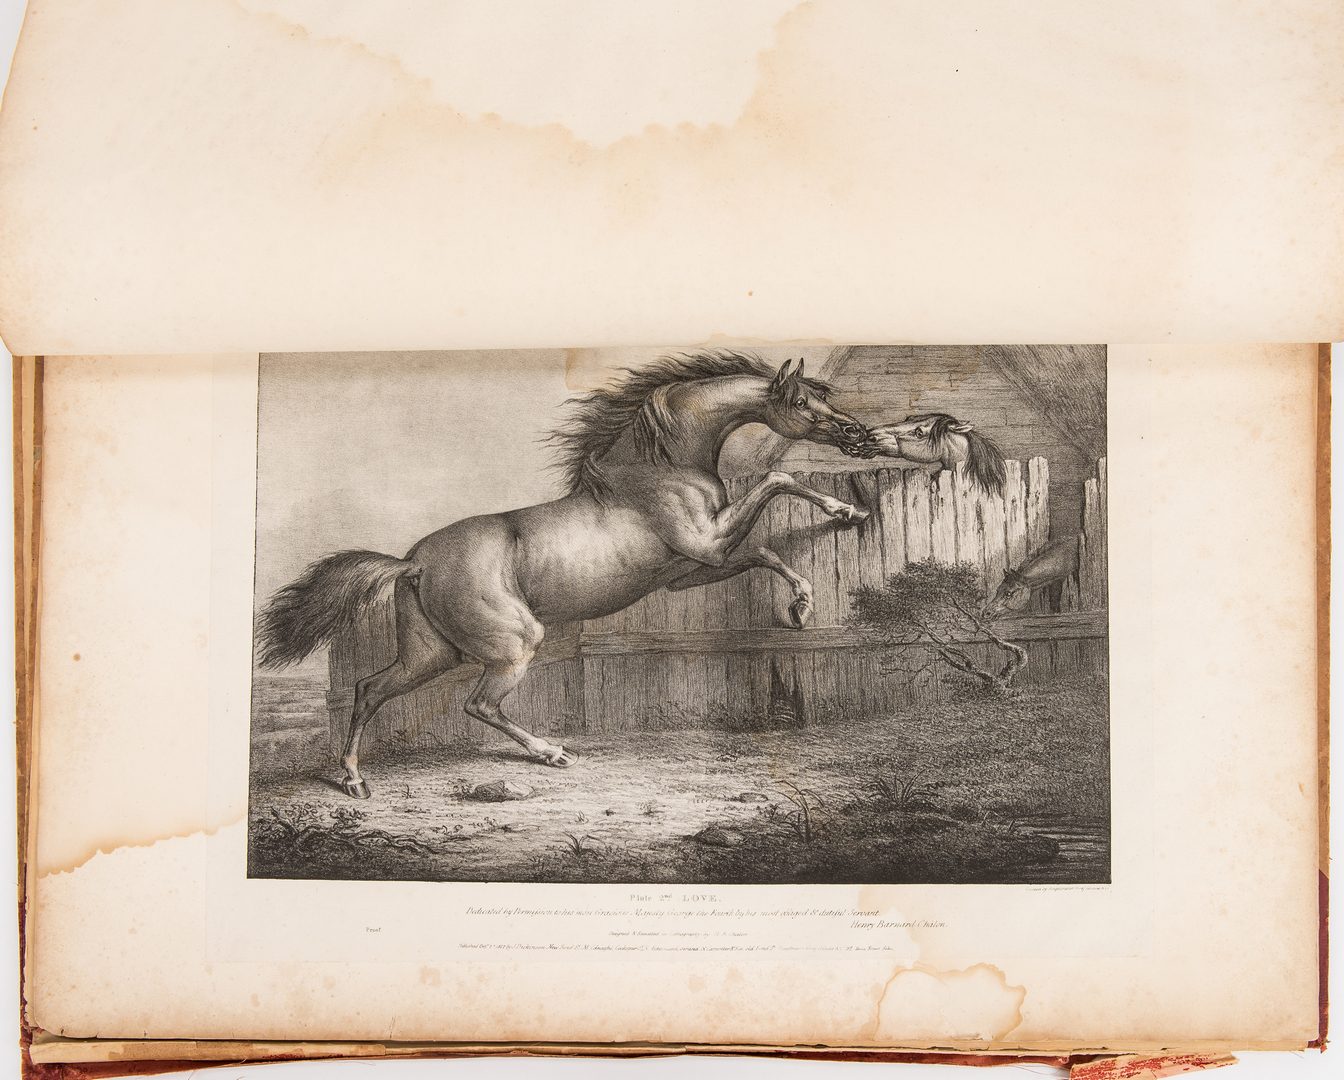 Lot 117: 1827 Folio of horse prints: Passions of the Horse